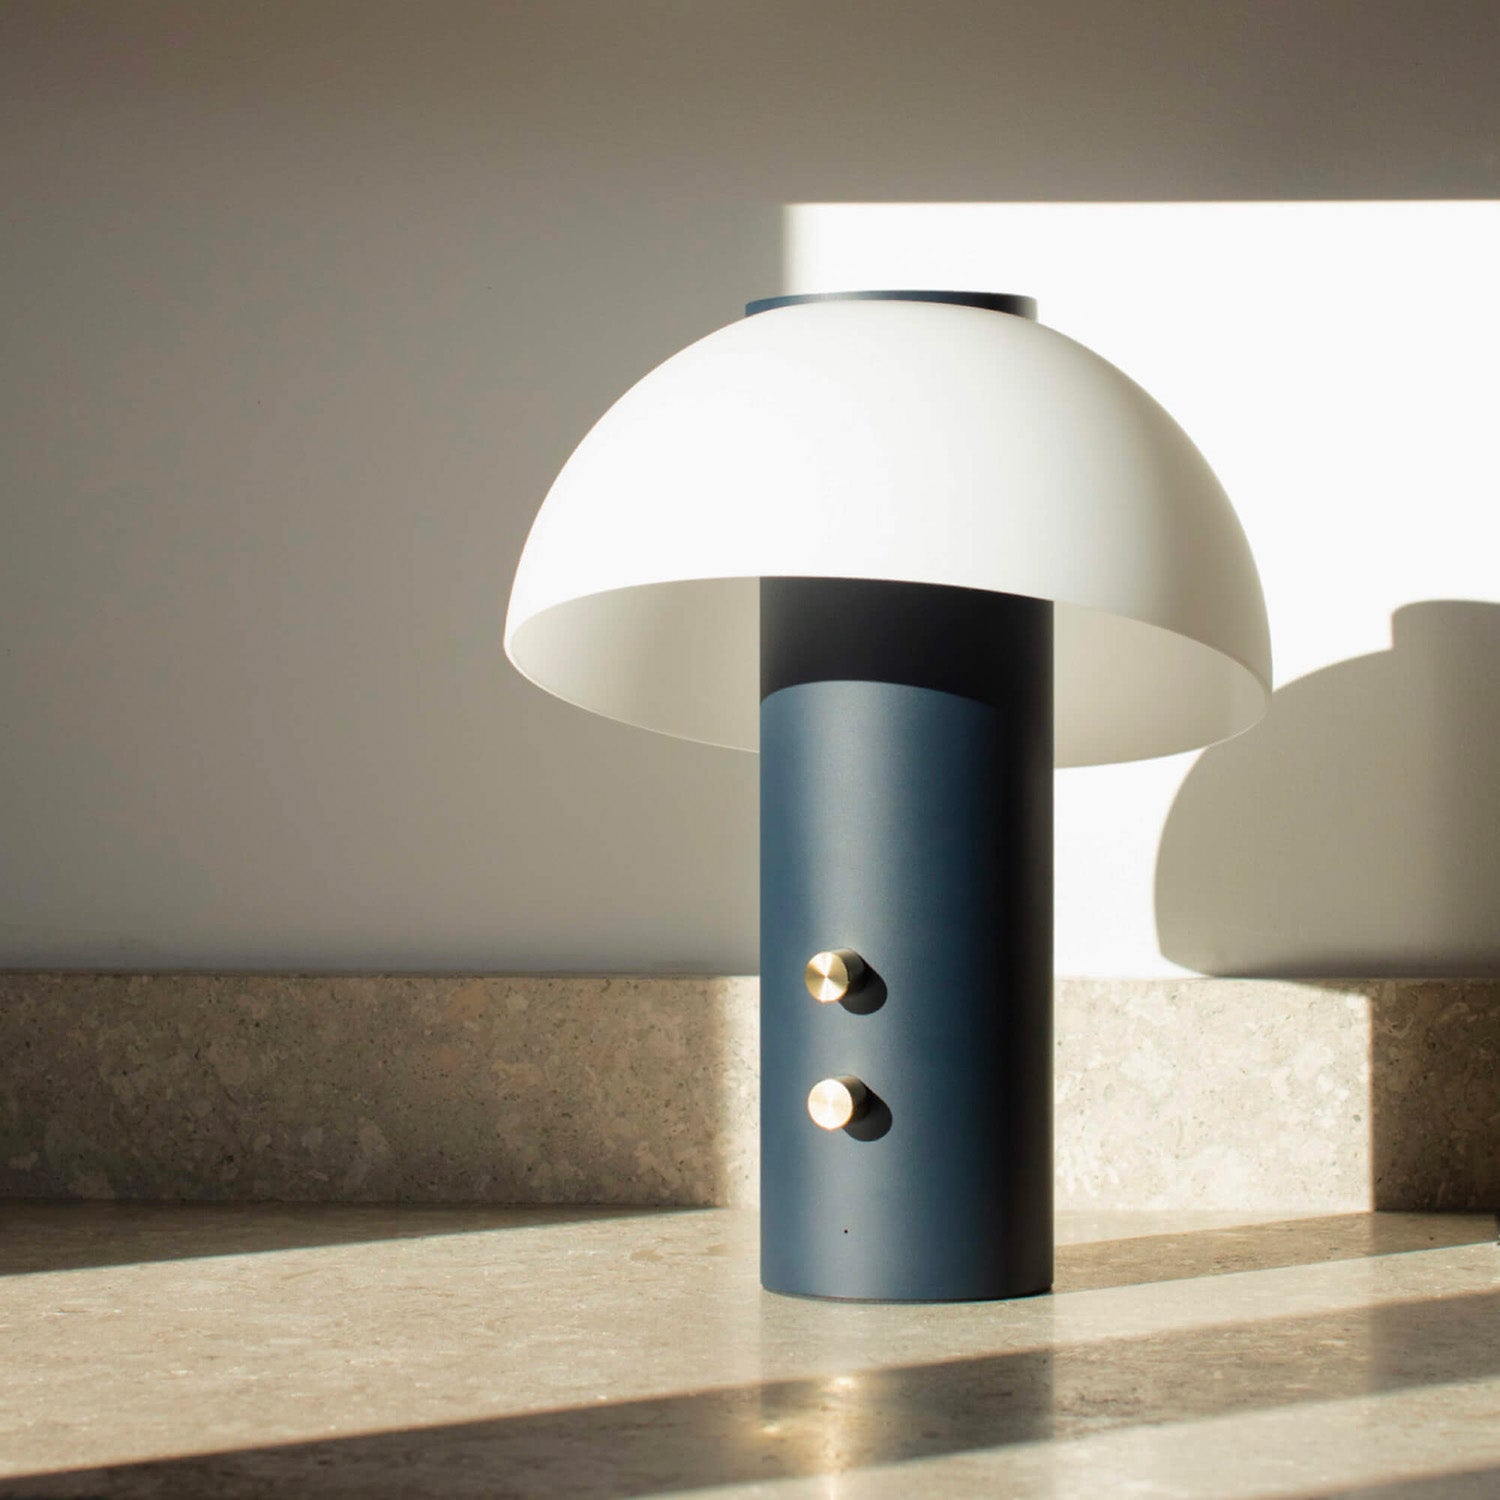 PICCOLO - Sound speaker lamp with integrated speaker